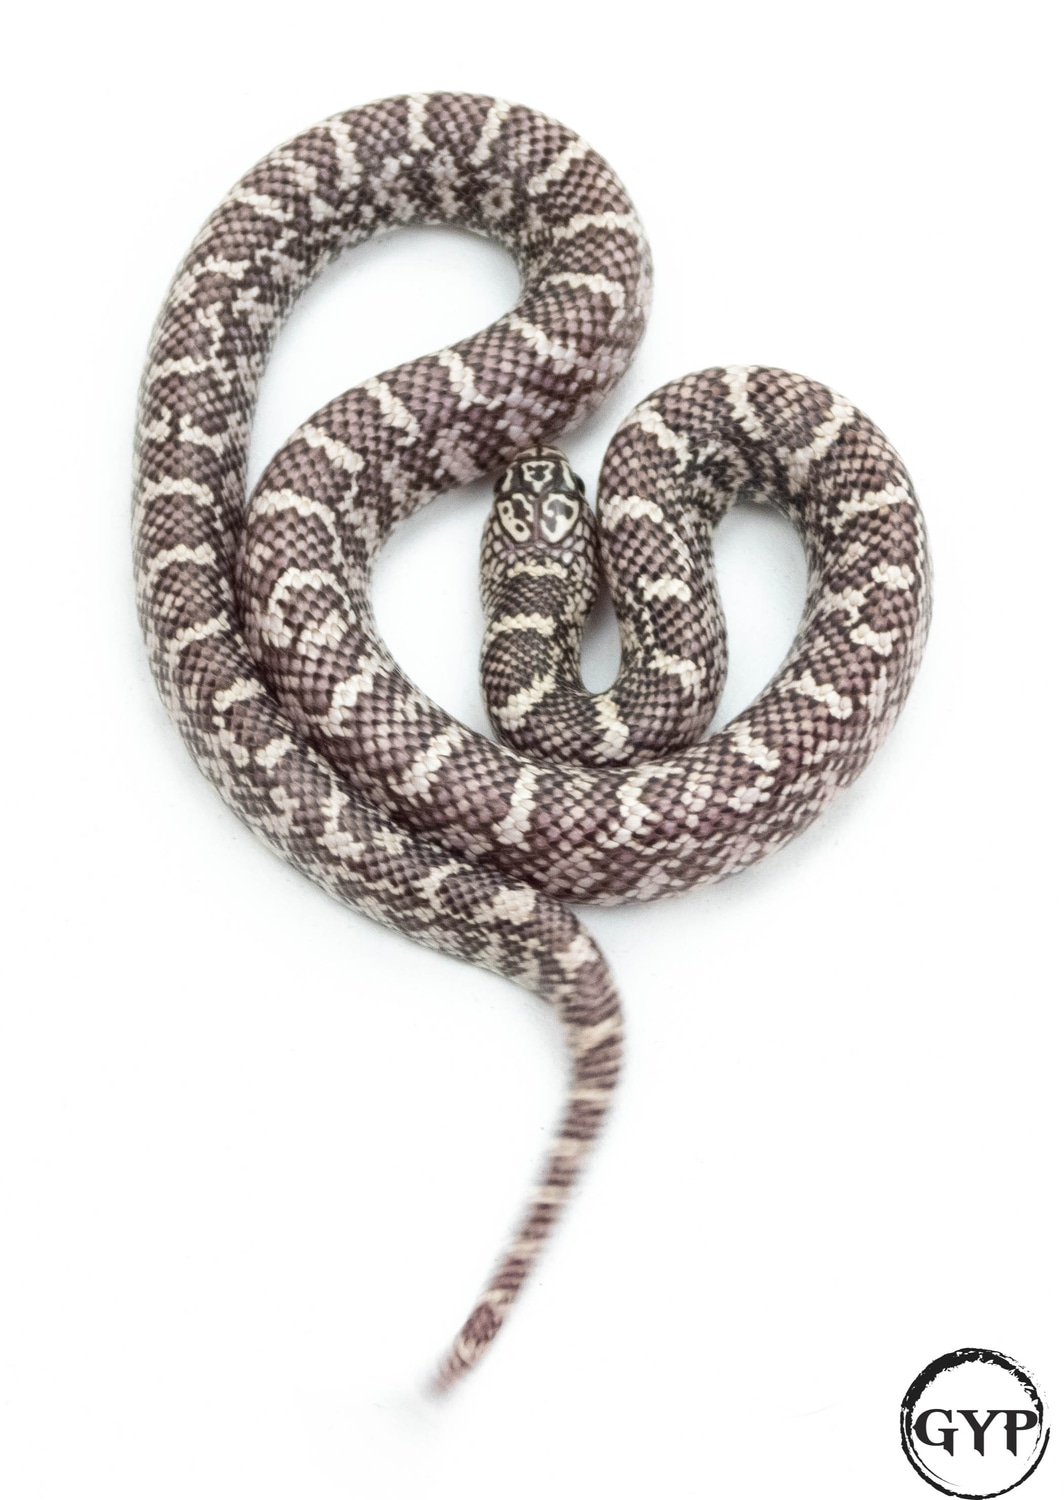 Anery Ghost Florida Kingsnake by Gopher Your Pet